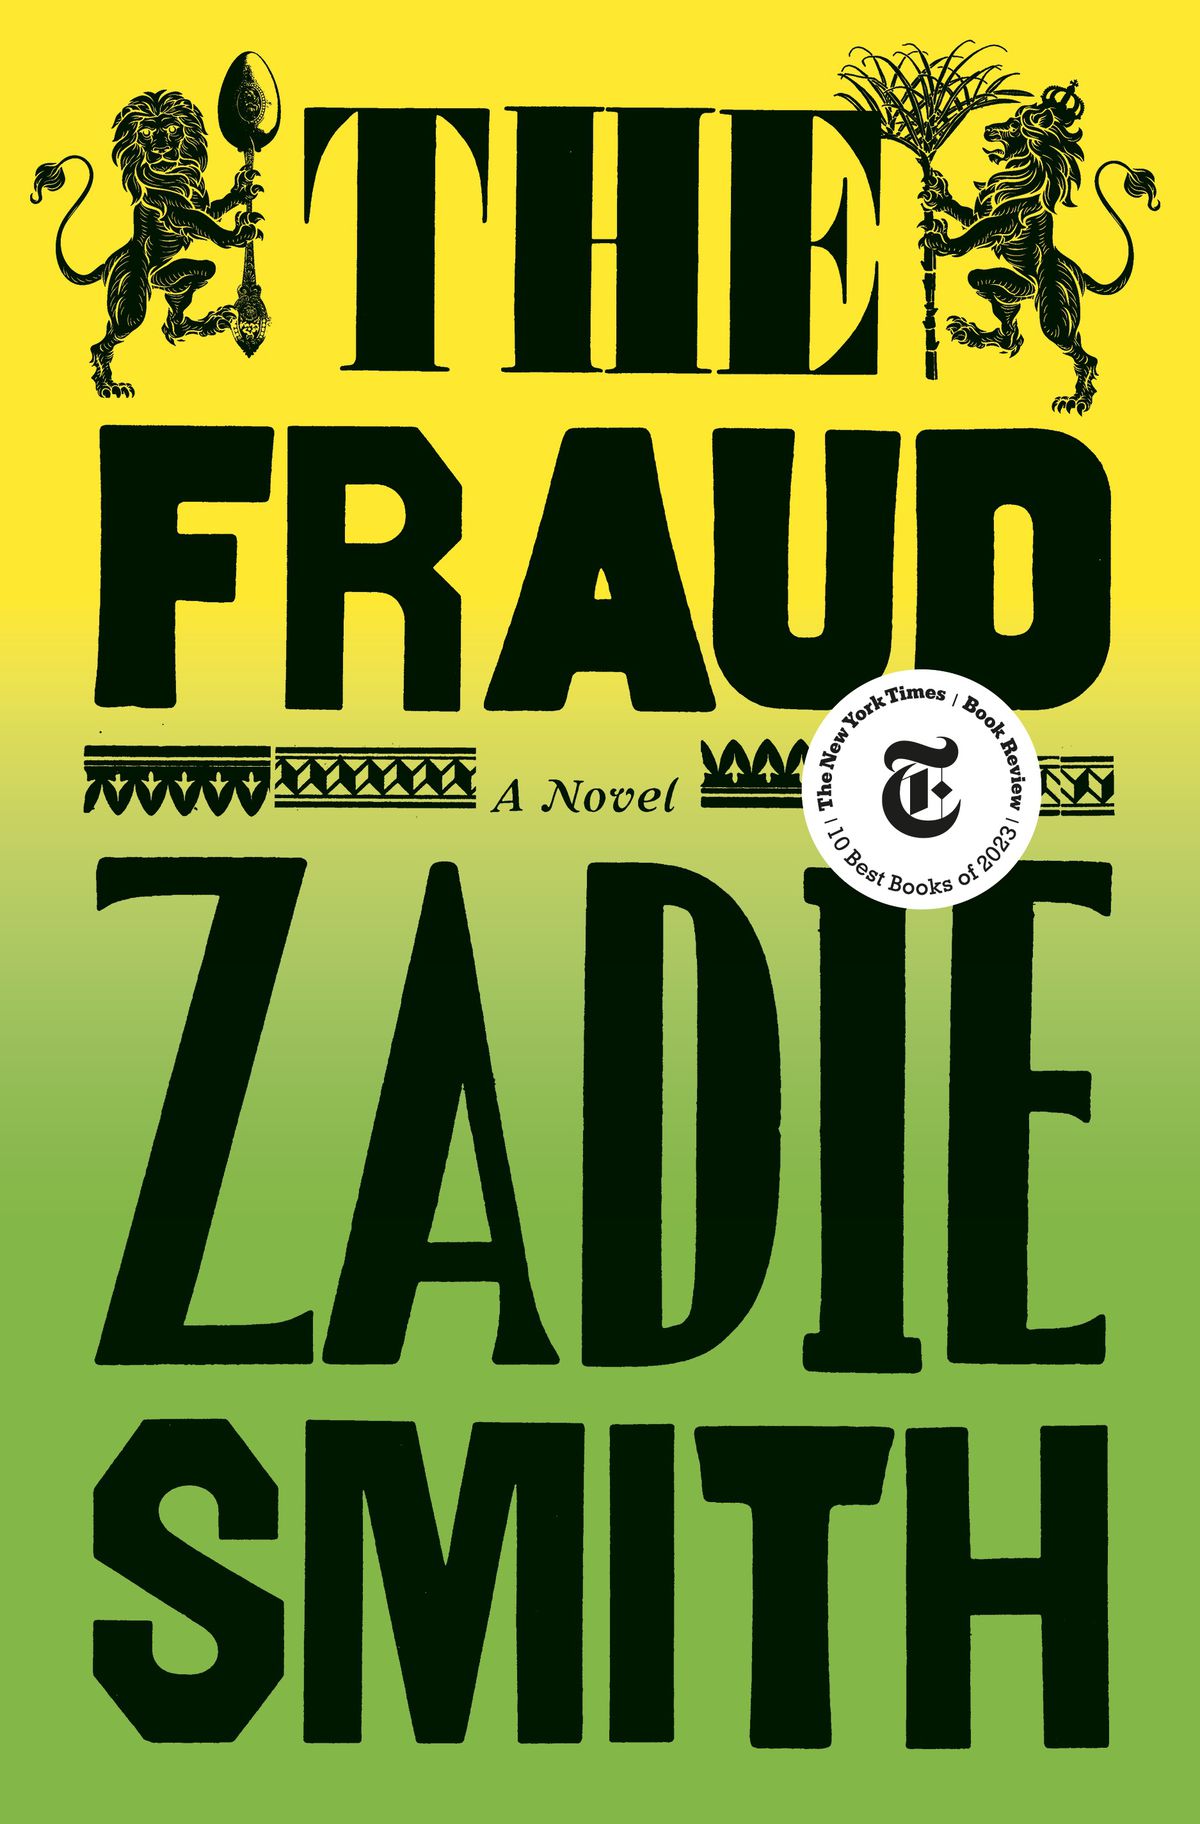 The book’s title appears on a gradient background shading from yellow on top to green on the bottom, with the British royal crest appearing at the top.